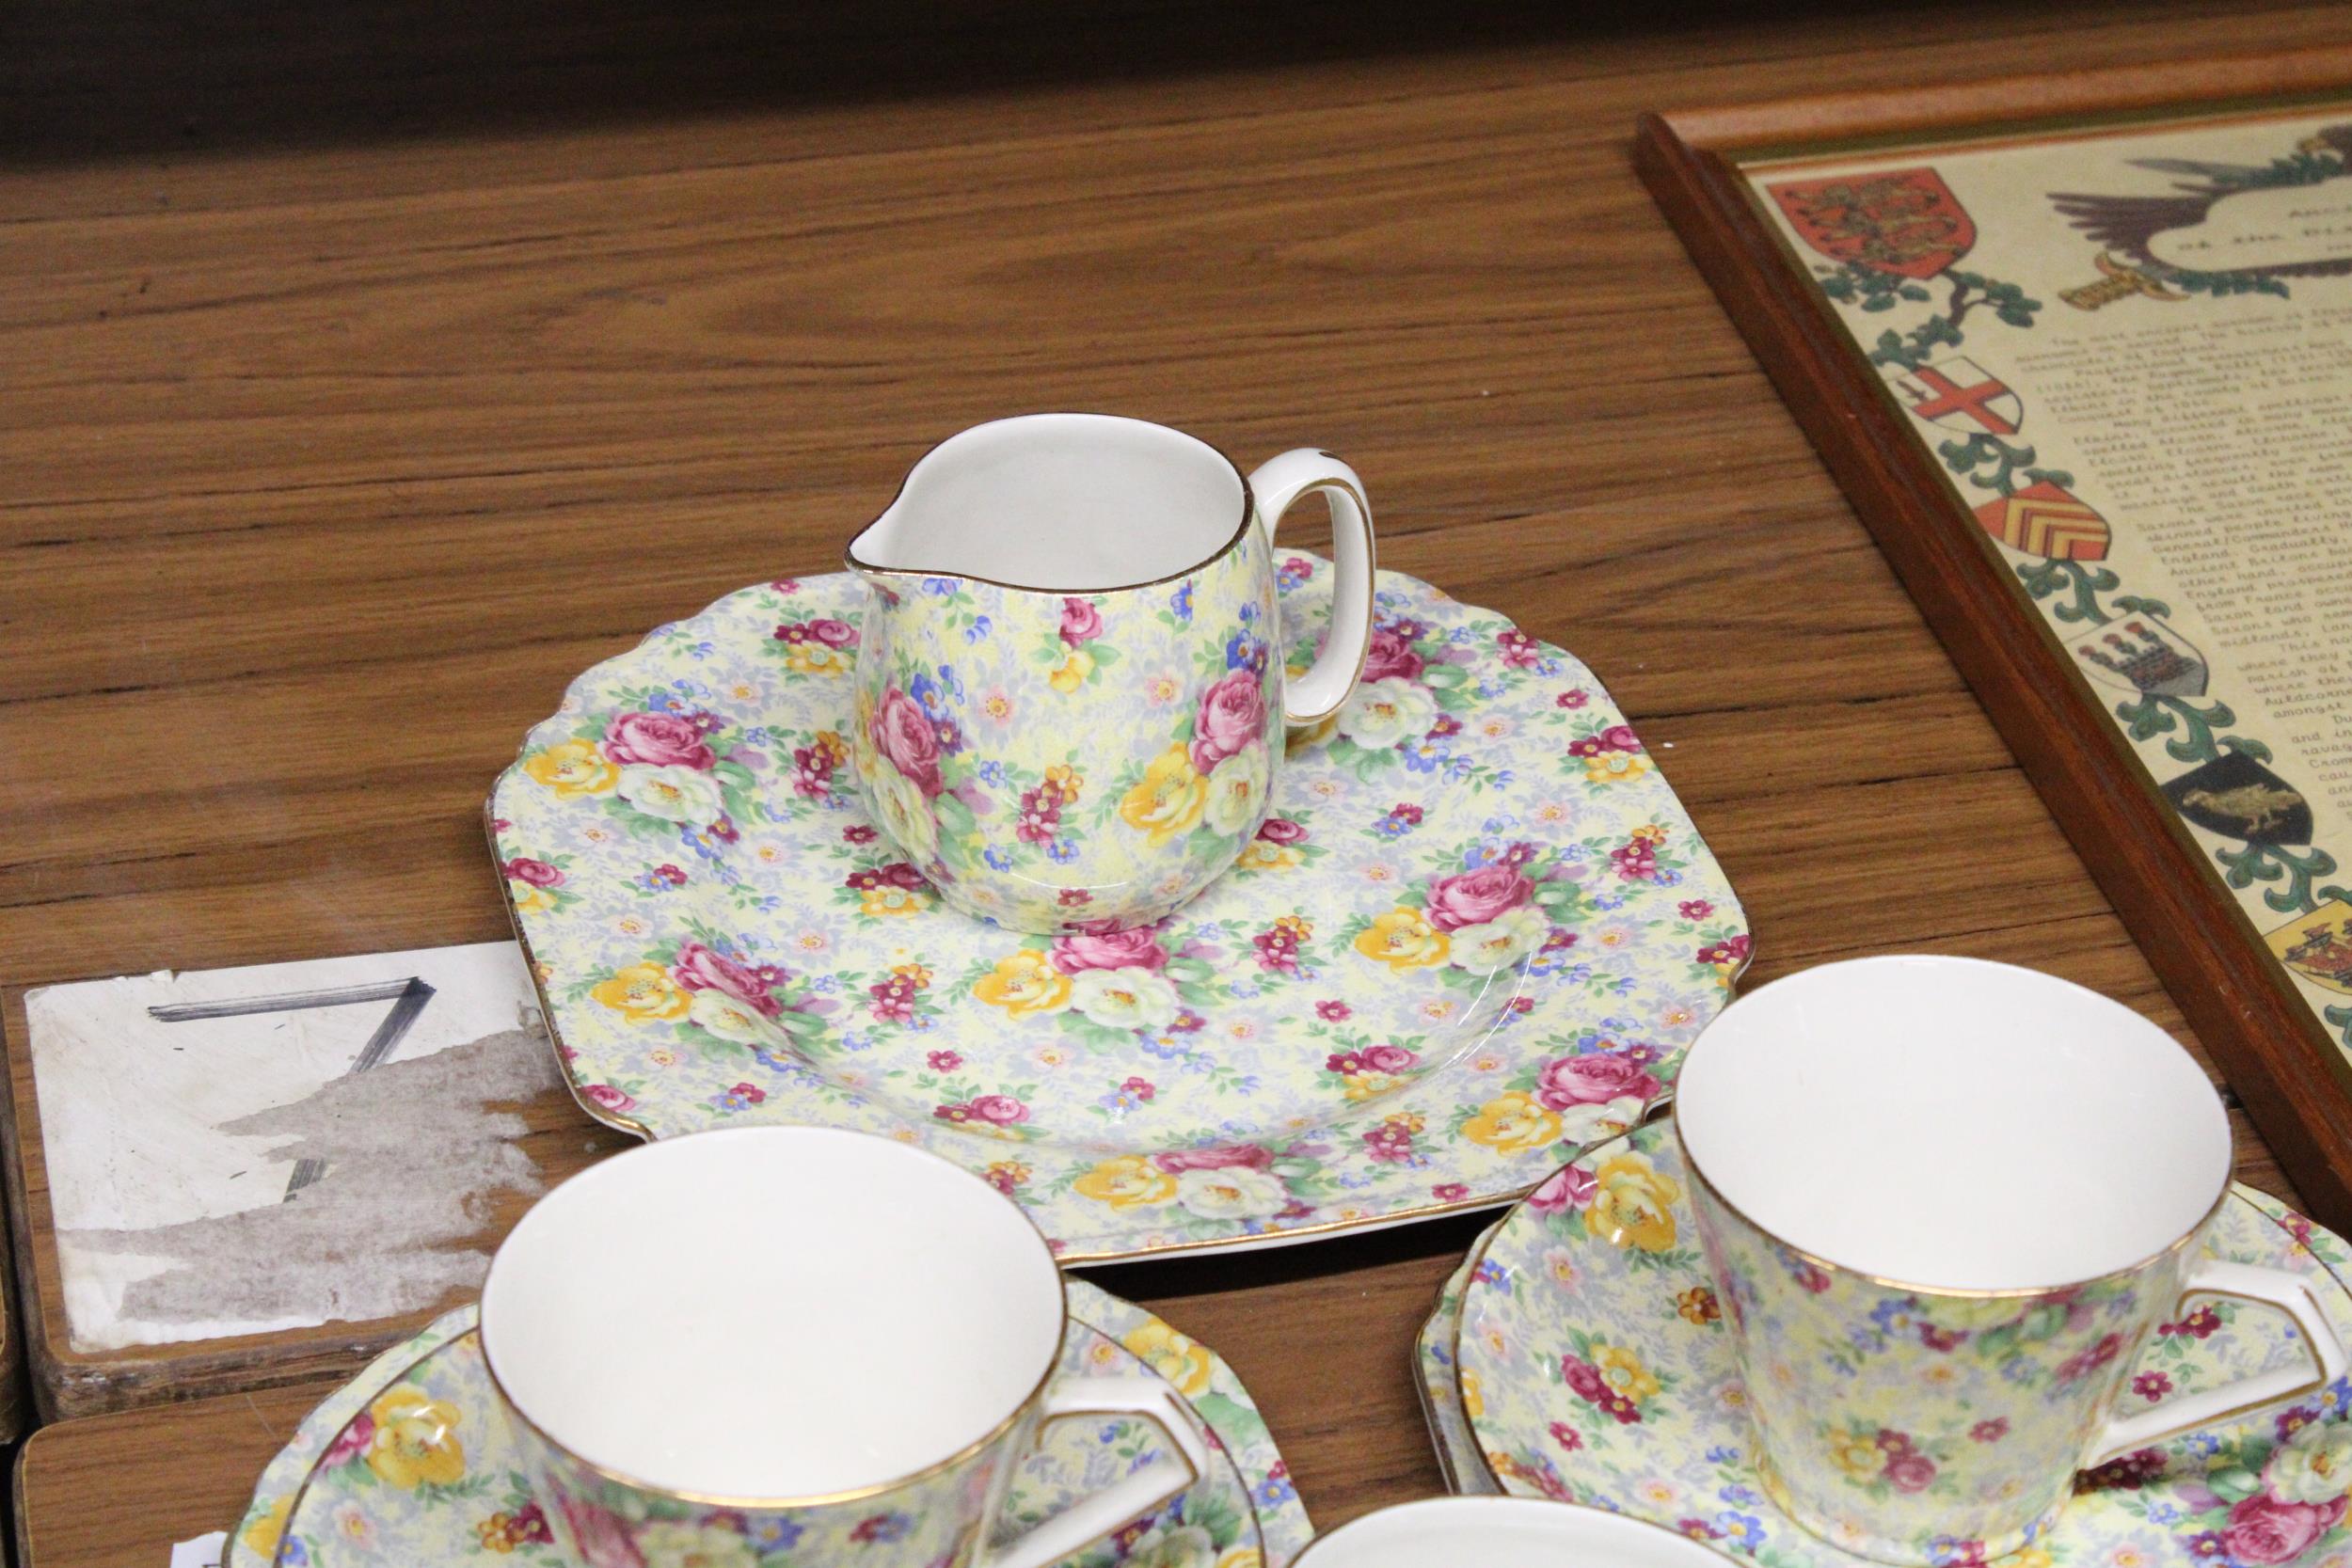 A LORD NELSON CHINTZ TEASET TO INCLUDE A CAKE PLATE, CREAM JUG, SUGAR BOWL, CUPS, SAUCERS AND SIDE - Image 5 of 5